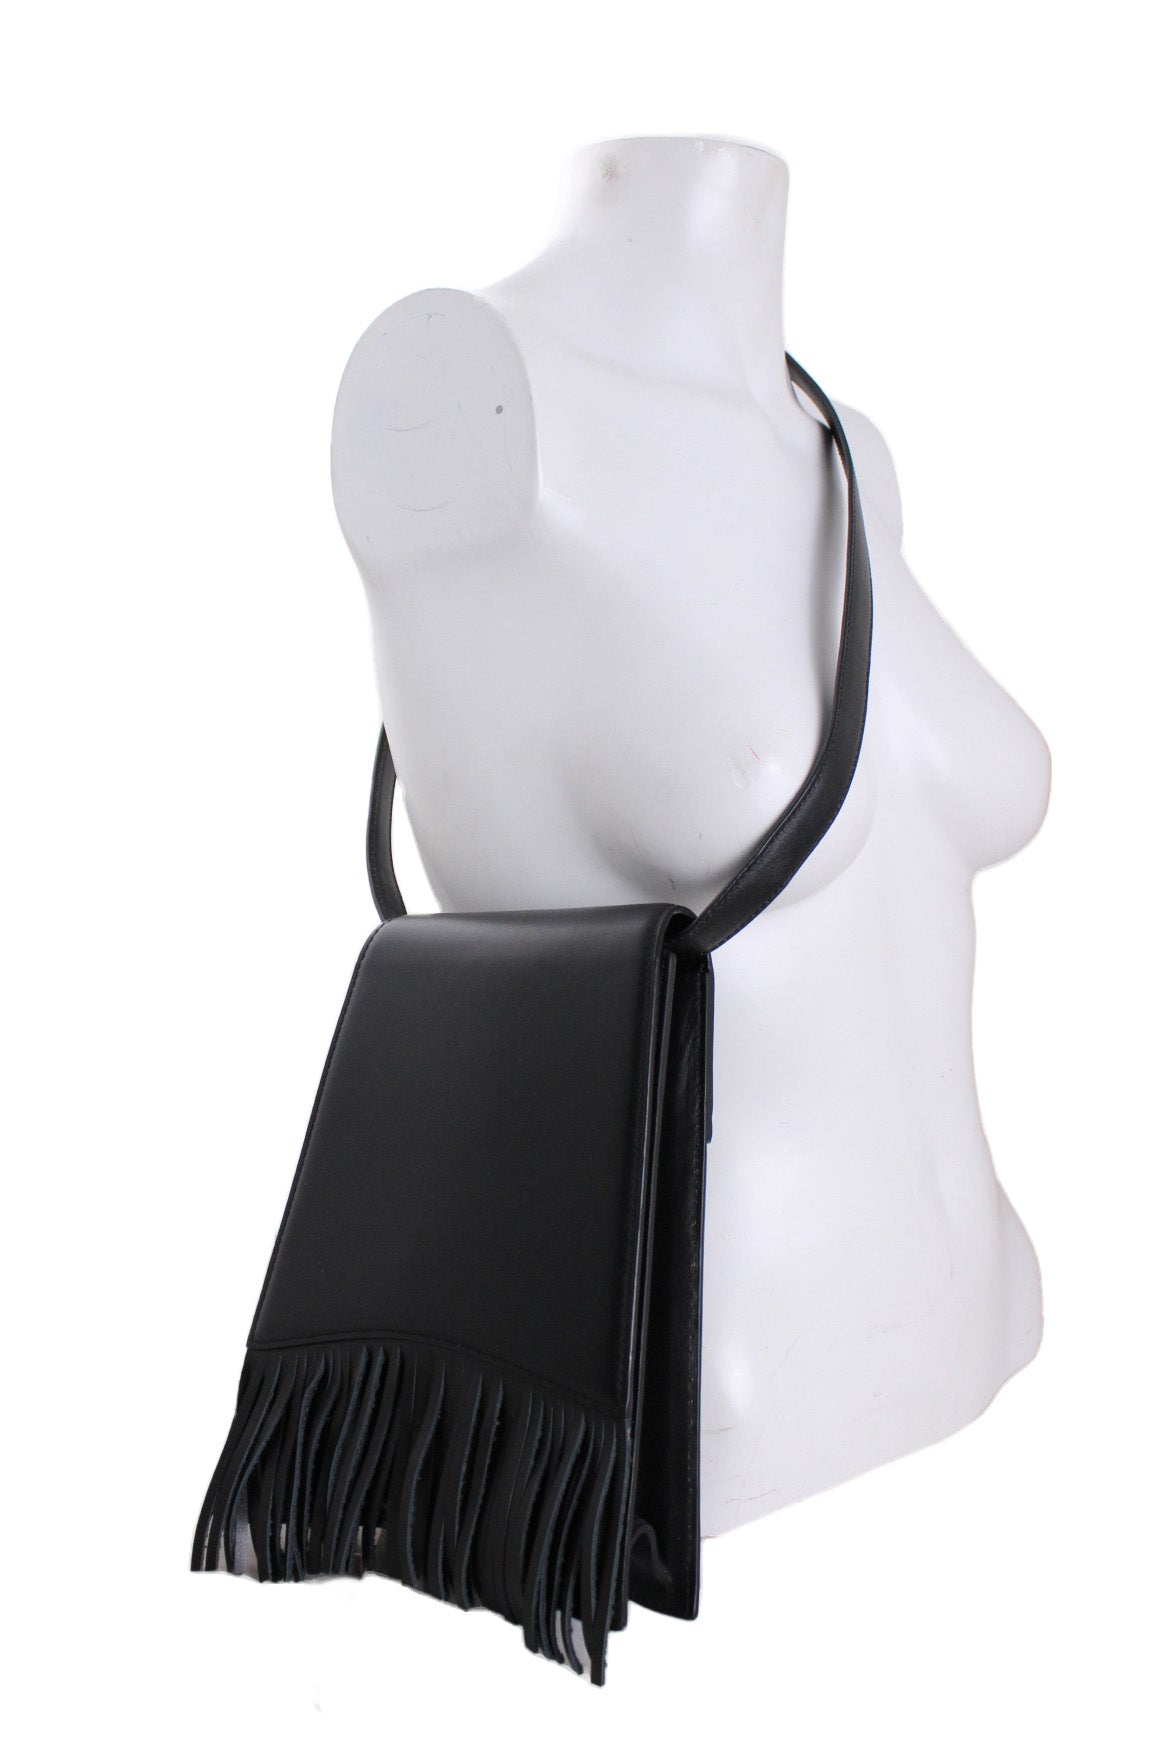 leather purse with cross body strap worn on fem mannequin bust. 